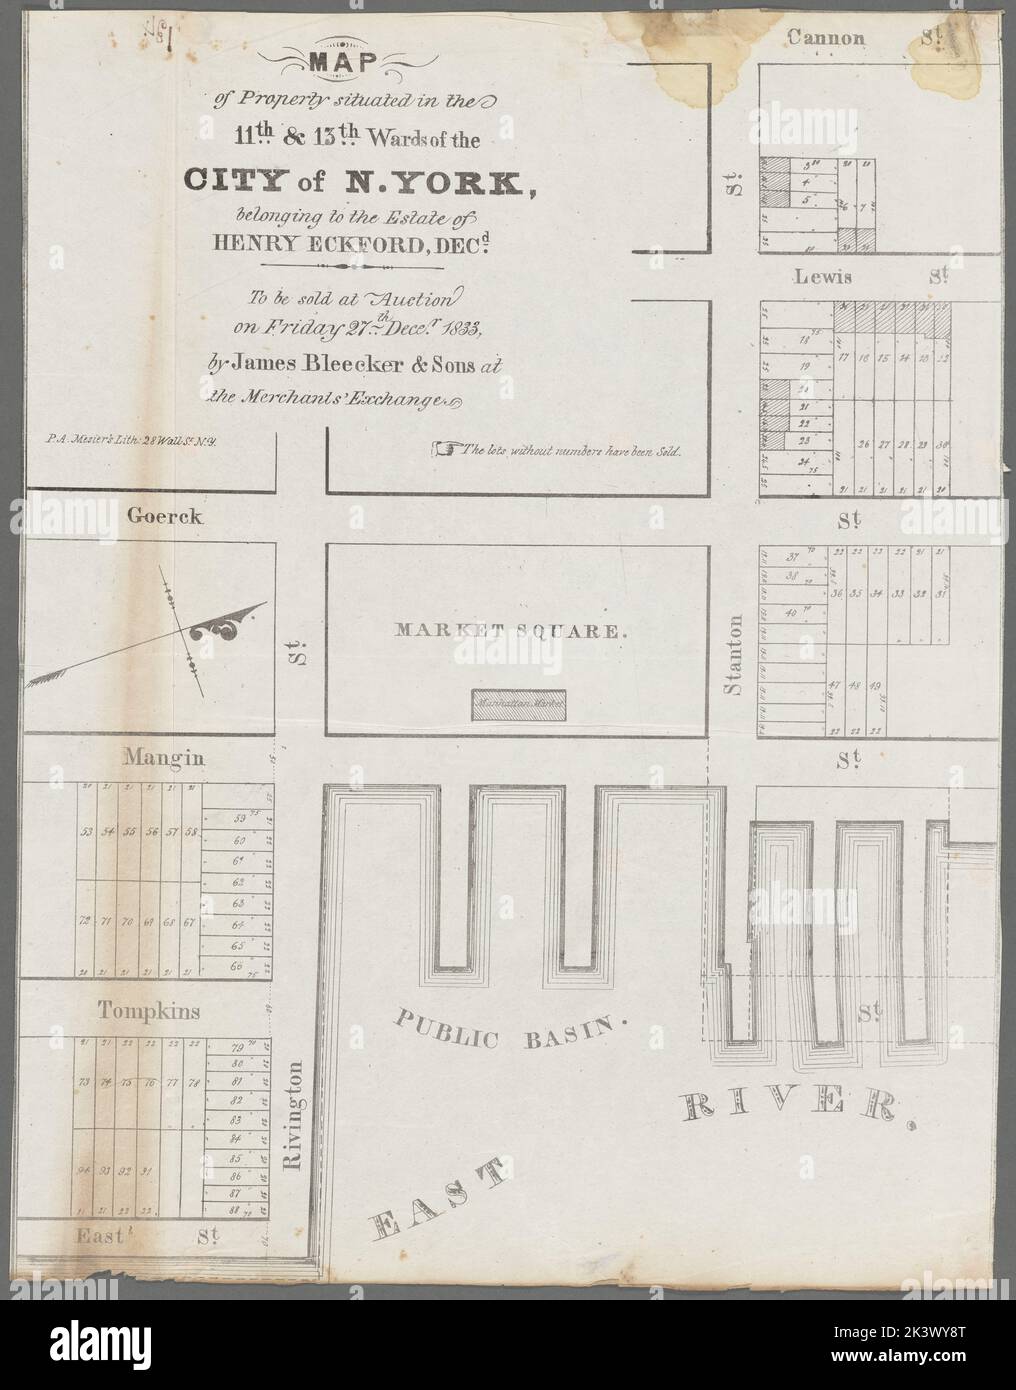 Map of property situated in the 11th & 13th Wards of the city of N. York, belonging to the estate of Henry Eckford, decd., to be sold at auction on Friday, 27th Decer., 1833, by James Bleecker & sons at the Merchants' Exchange Cartographic. Cadastral maps, Maps. 1833. Lionel Pincus and Princess Firyal Map Division. United States , New York (State) , New York, Landowners , New York (State) , New York, Real property , New York (State) , New York, Real propery auctions , New York (State) , New York, Manhattan (New York, N.Y.), Lower East Side (New York, N.Y.) Stock Photo